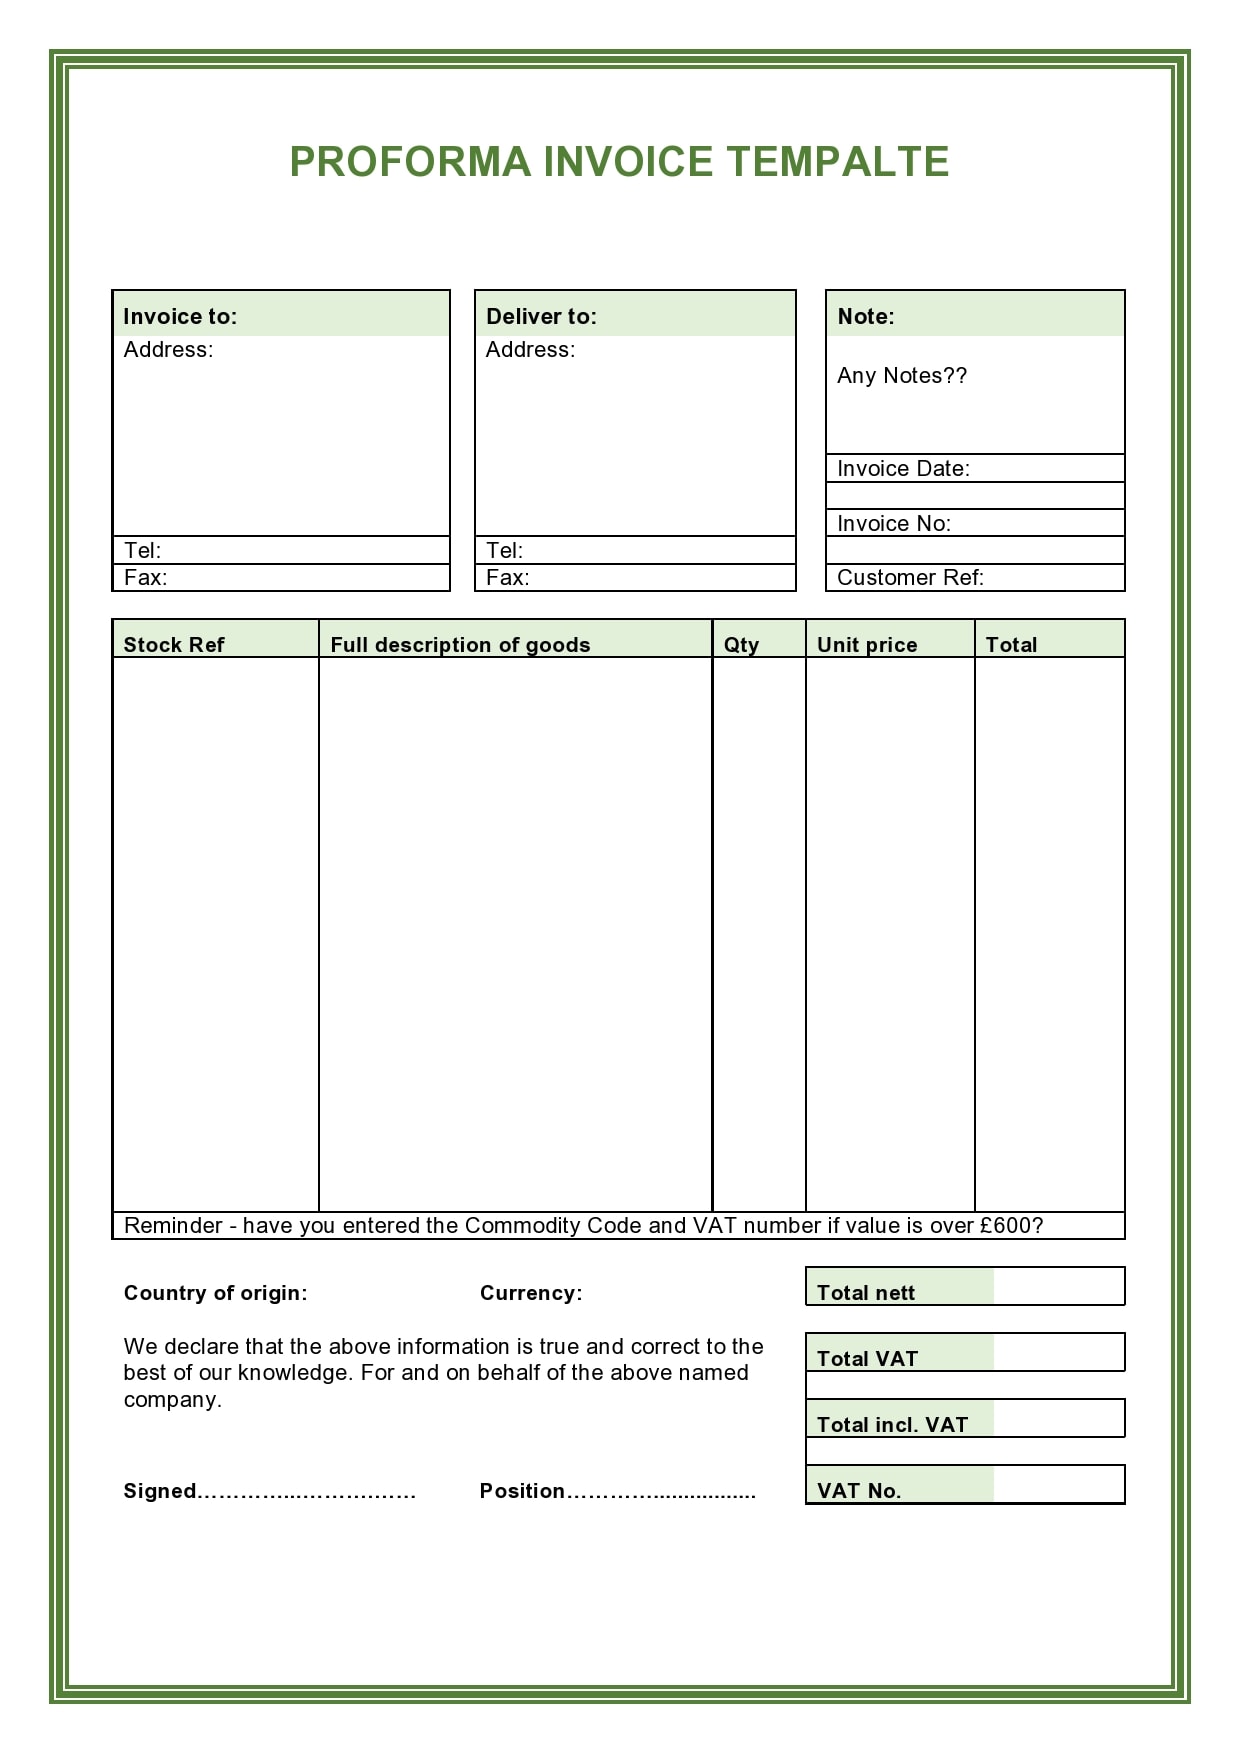 23 Free Proforma Invoice Templates [Excel, Word, PDF With Commercial Invoice Template Word Doc